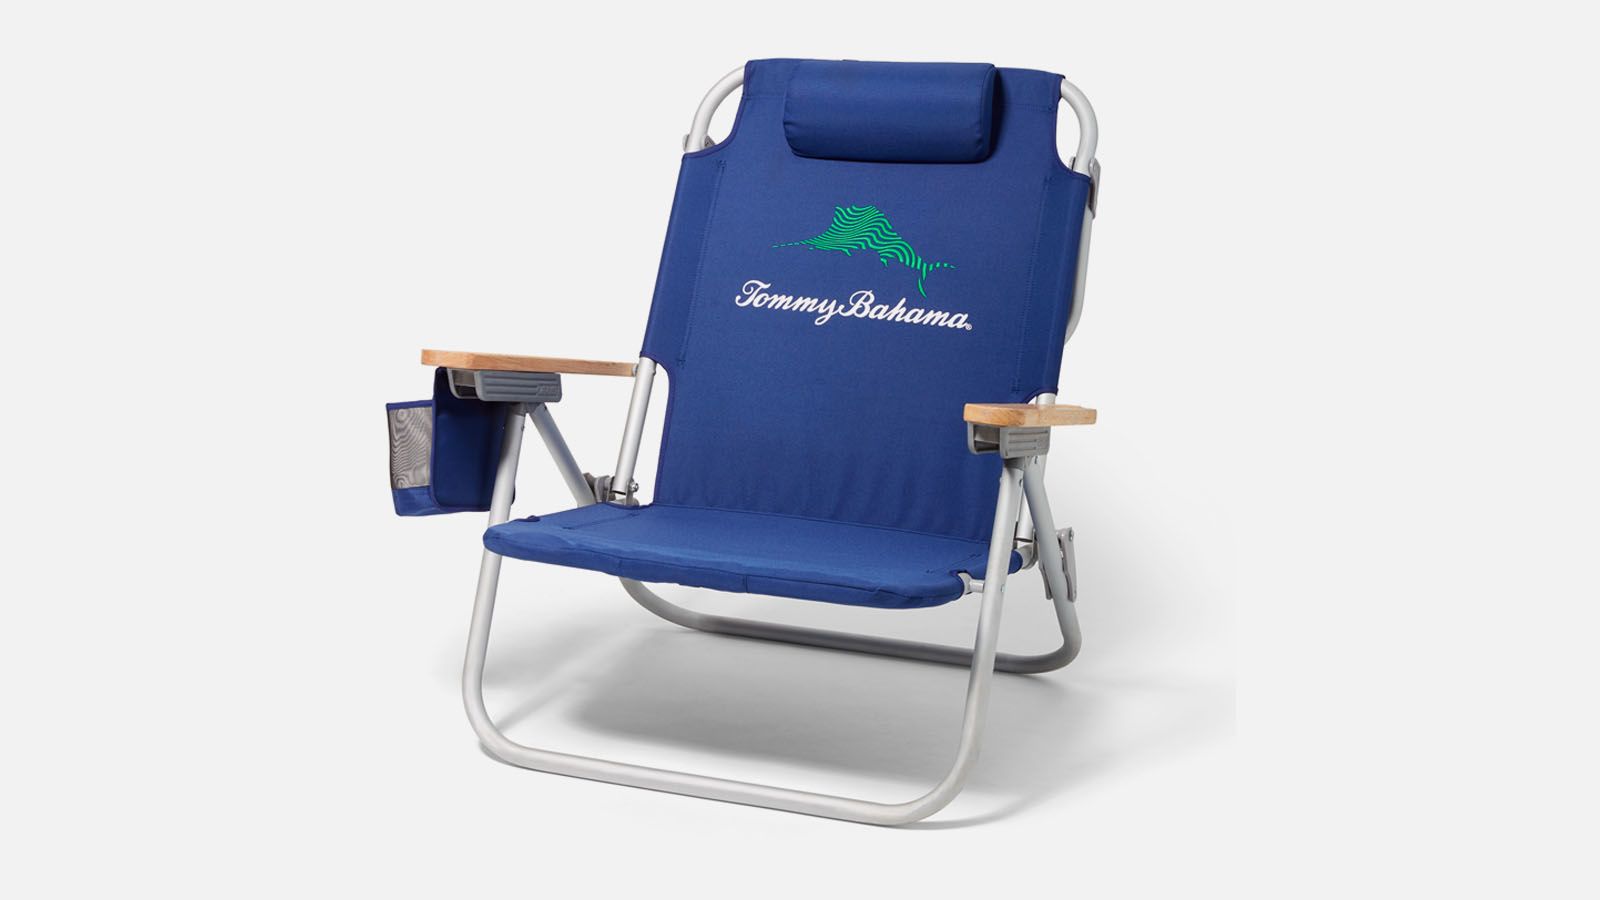 Prophecy Notebook pavement It's not just you. Tommy Bahama beach chairs are everywhere | CNN Business